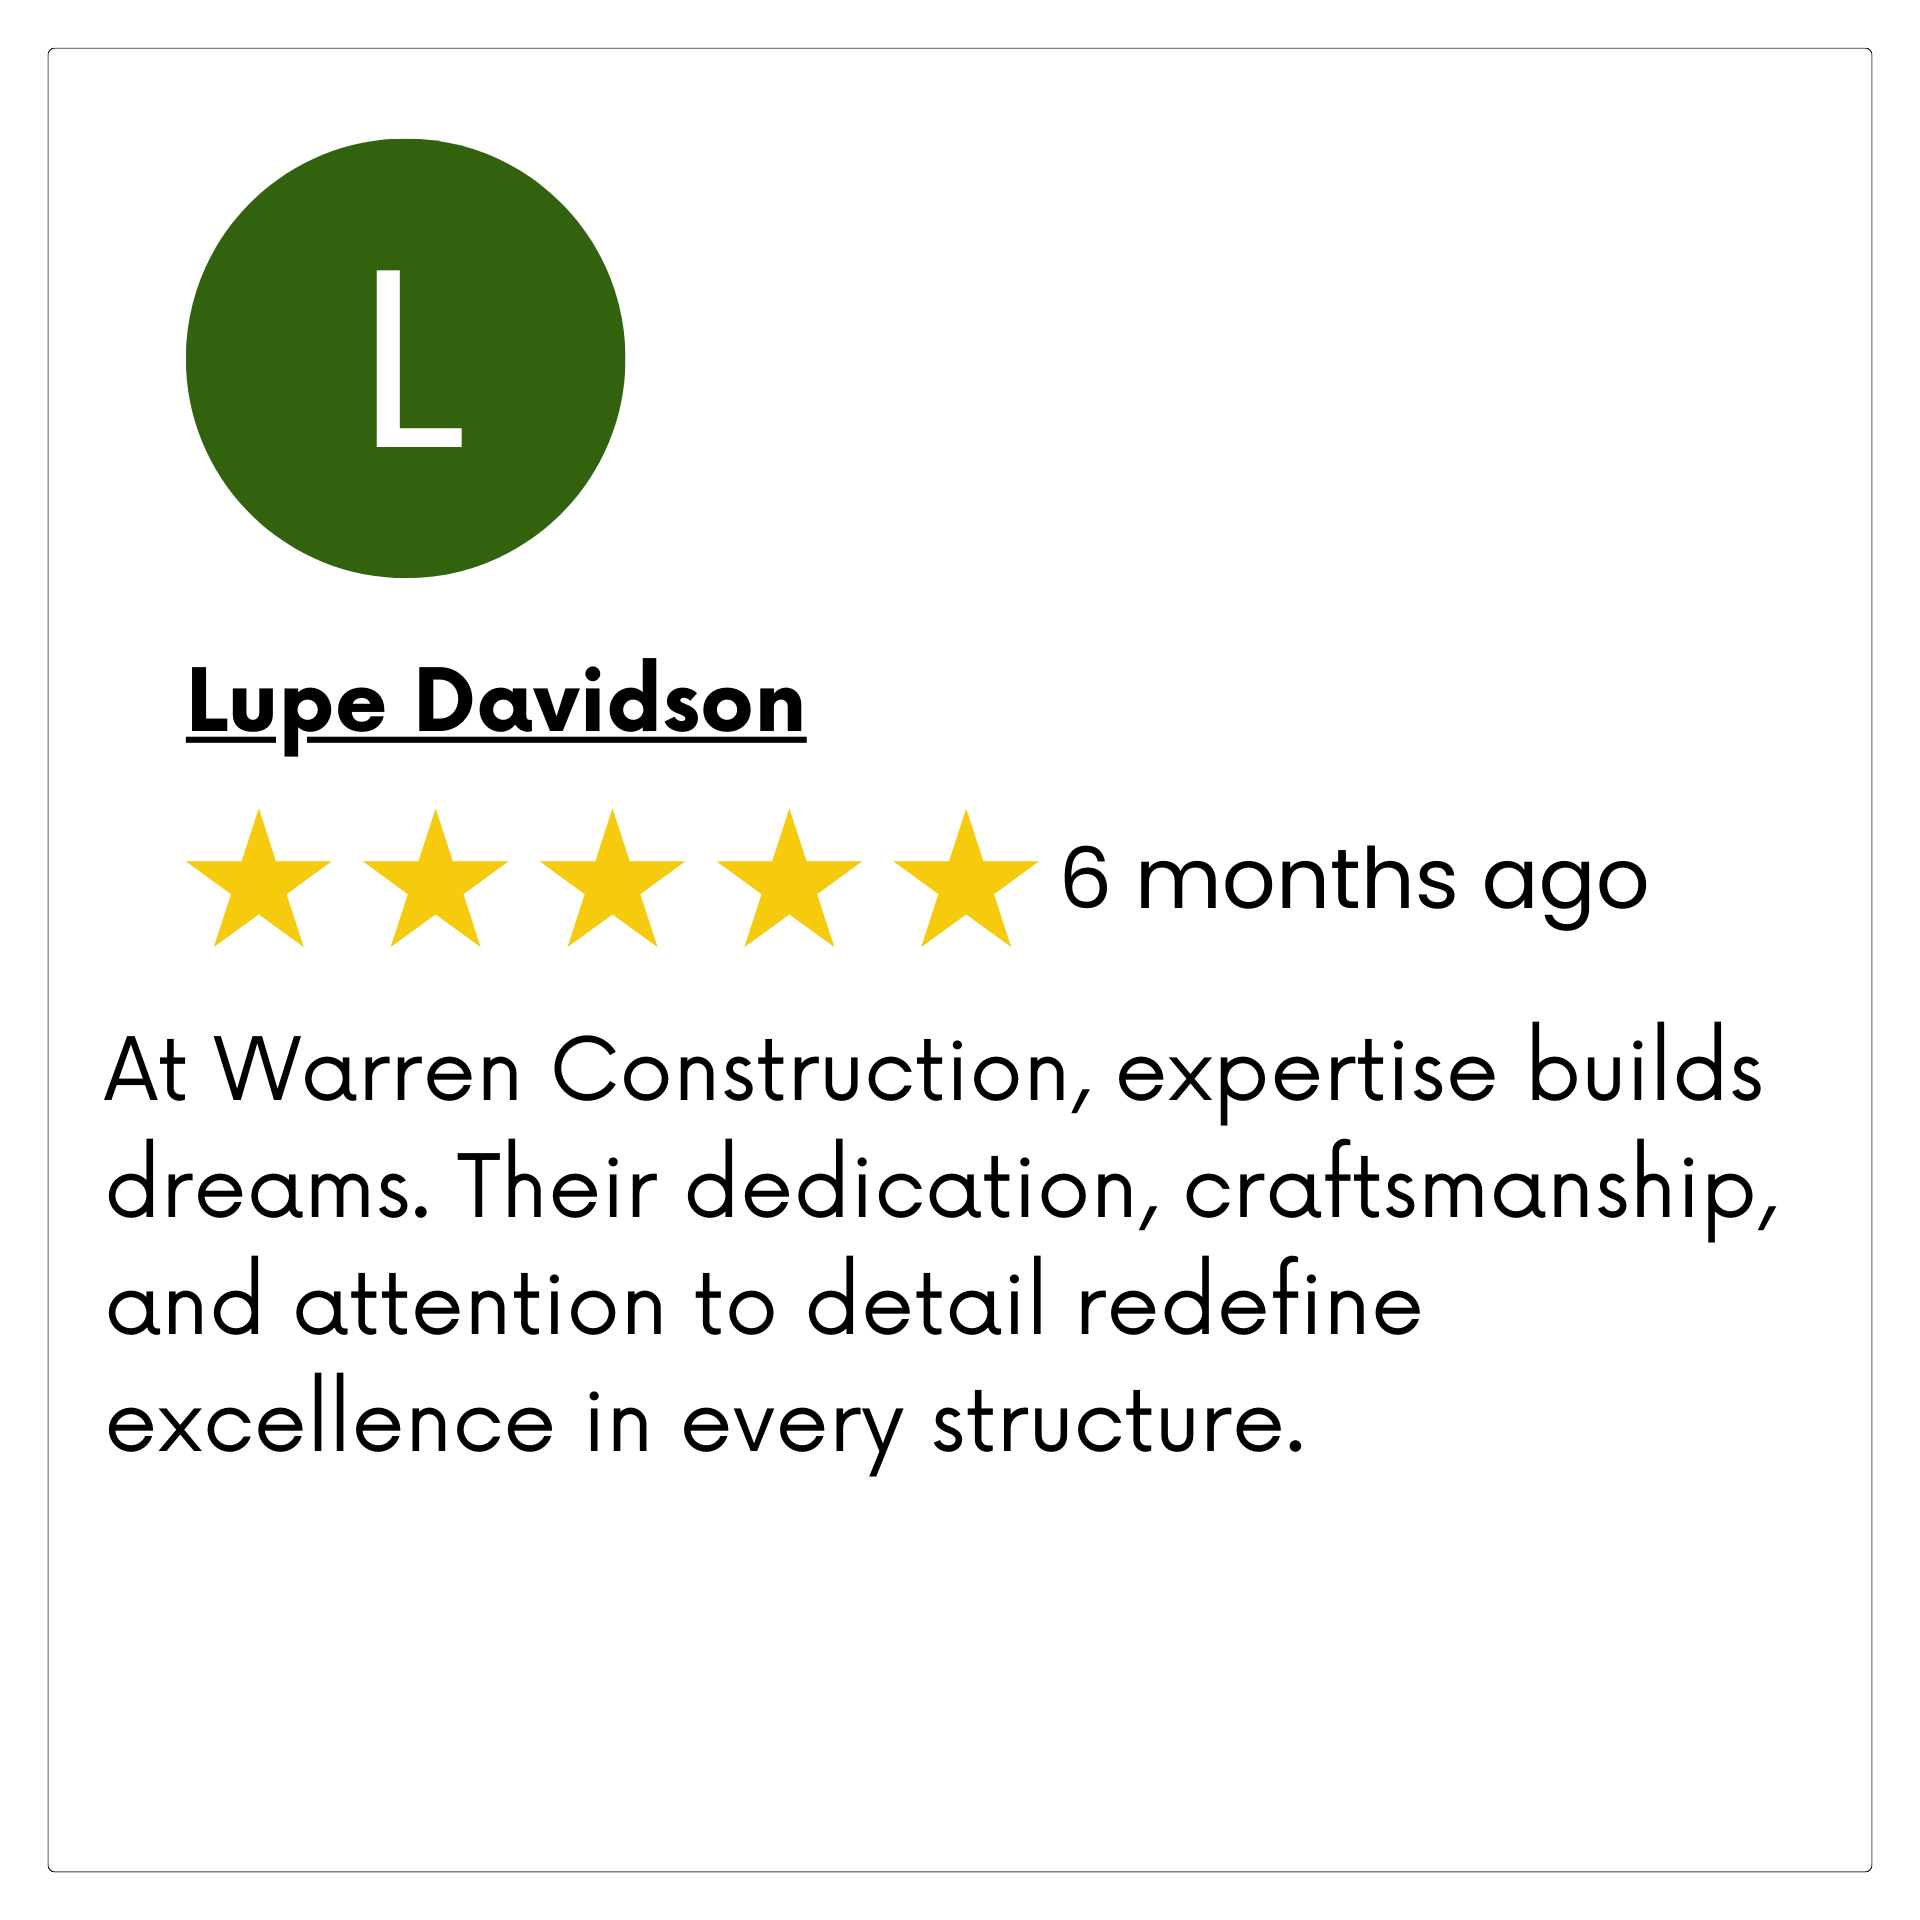 A review from lupe davidson at warren construction , expertise builds dreams.